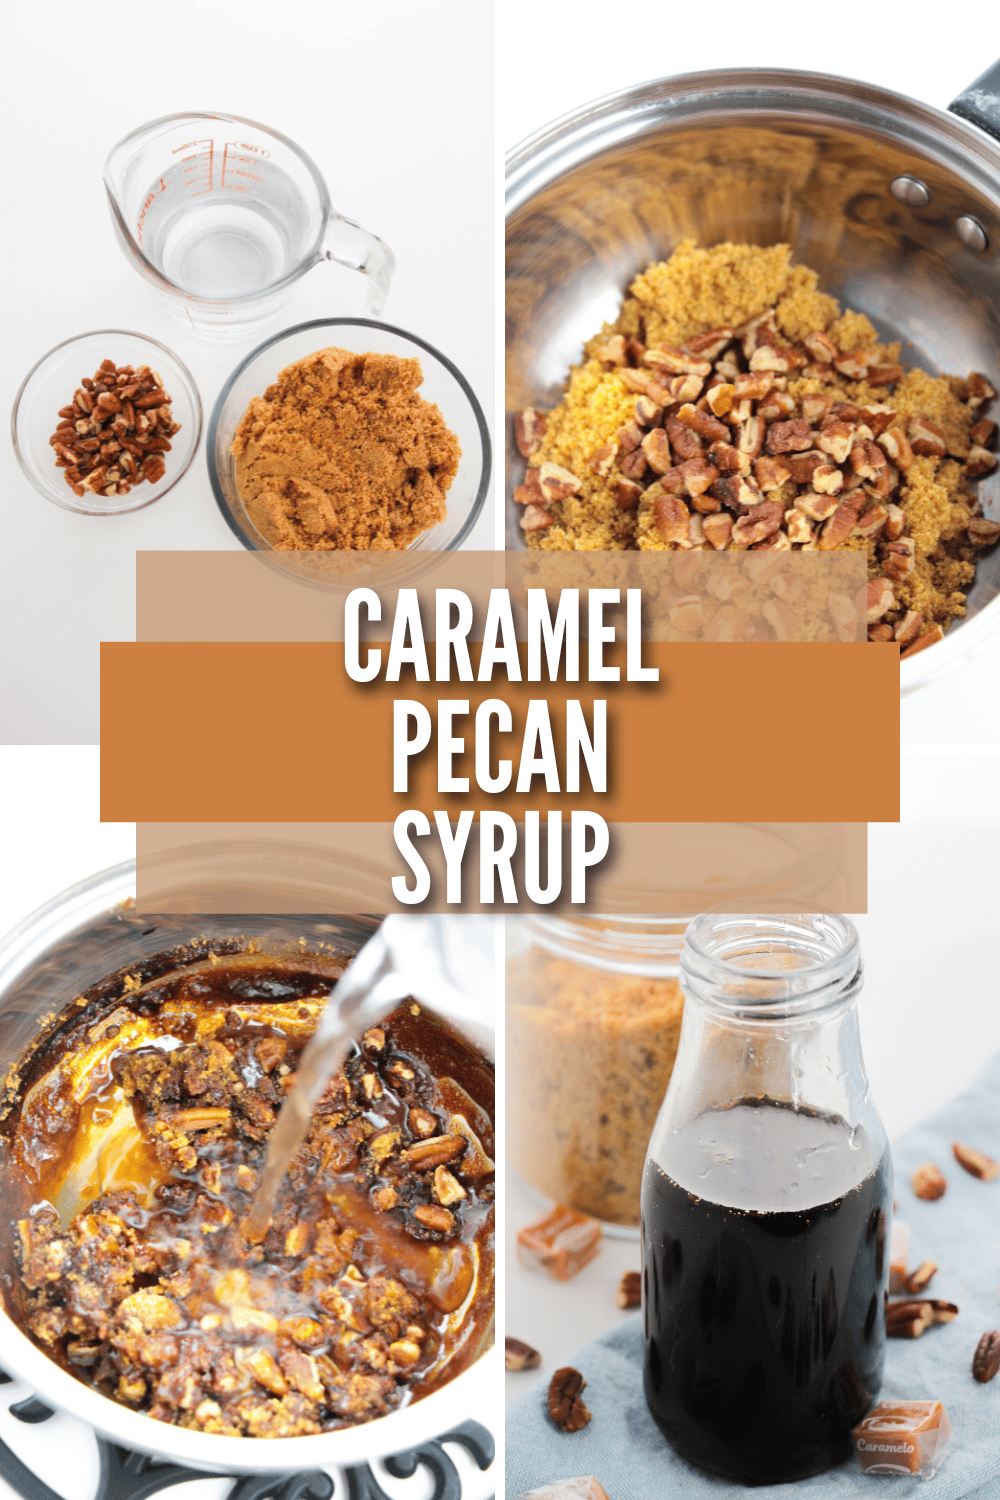 This Caramel Pecan Syrup is a mouth-watering, rich and flavorful syrup. It is perfect for topping pancakes, waffles, french toast, and more. #caramelpecansyrup #caramel #pecan #syrup via @wondermomwannab